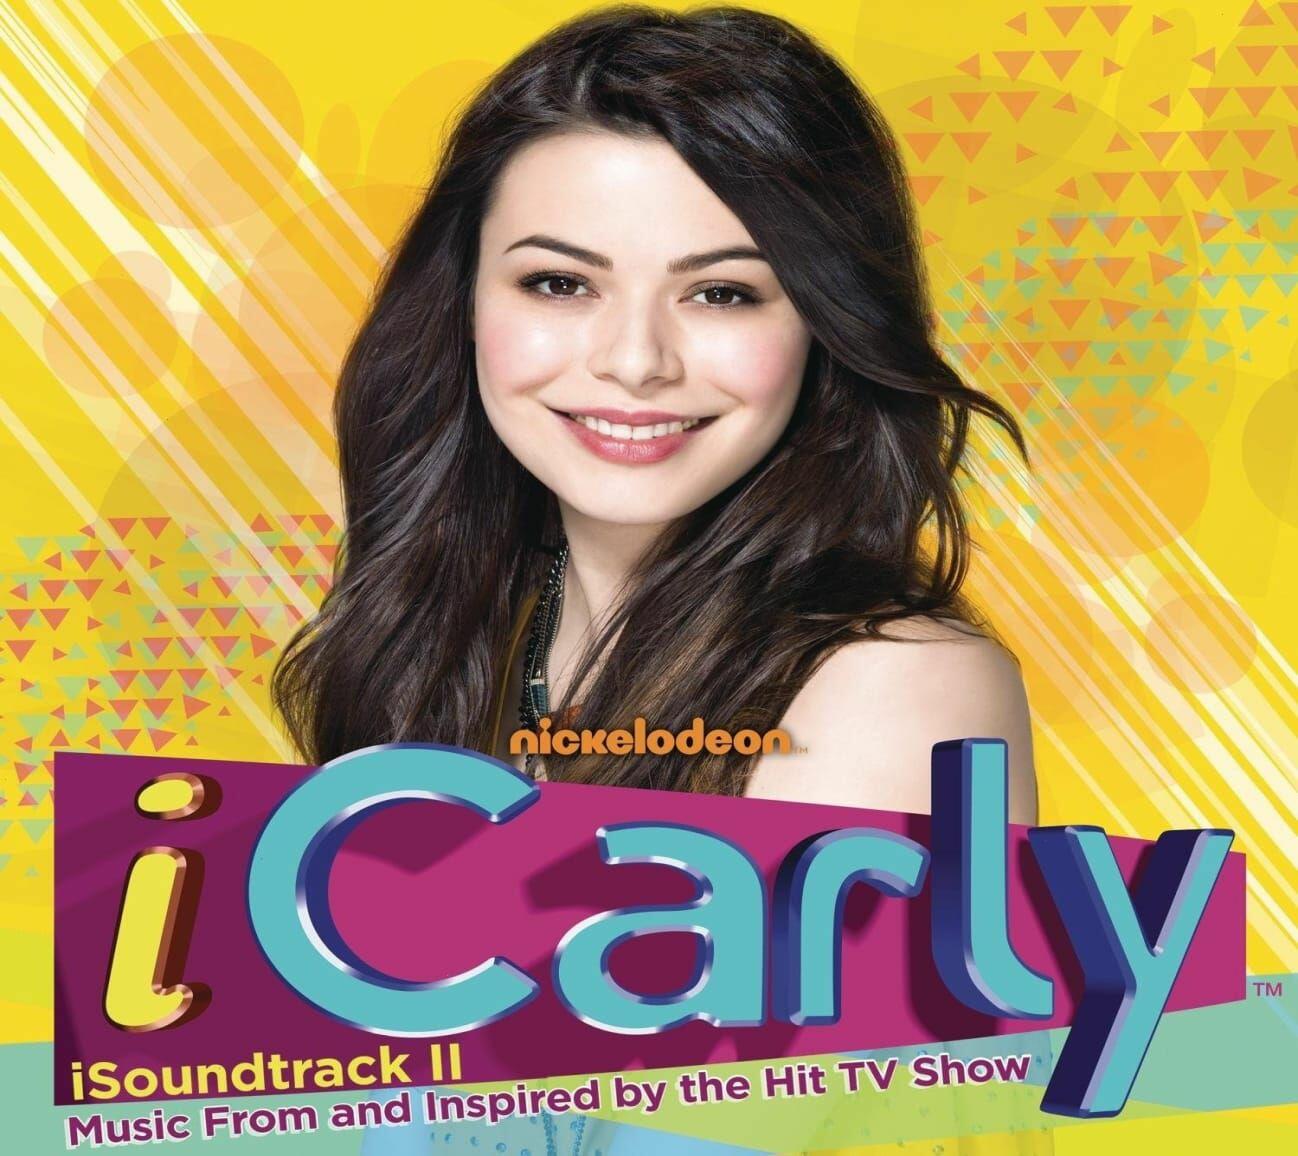 iCarly Soundtrack II – Music from and Inspired by the Hit TV Show (CD) on MovieShack